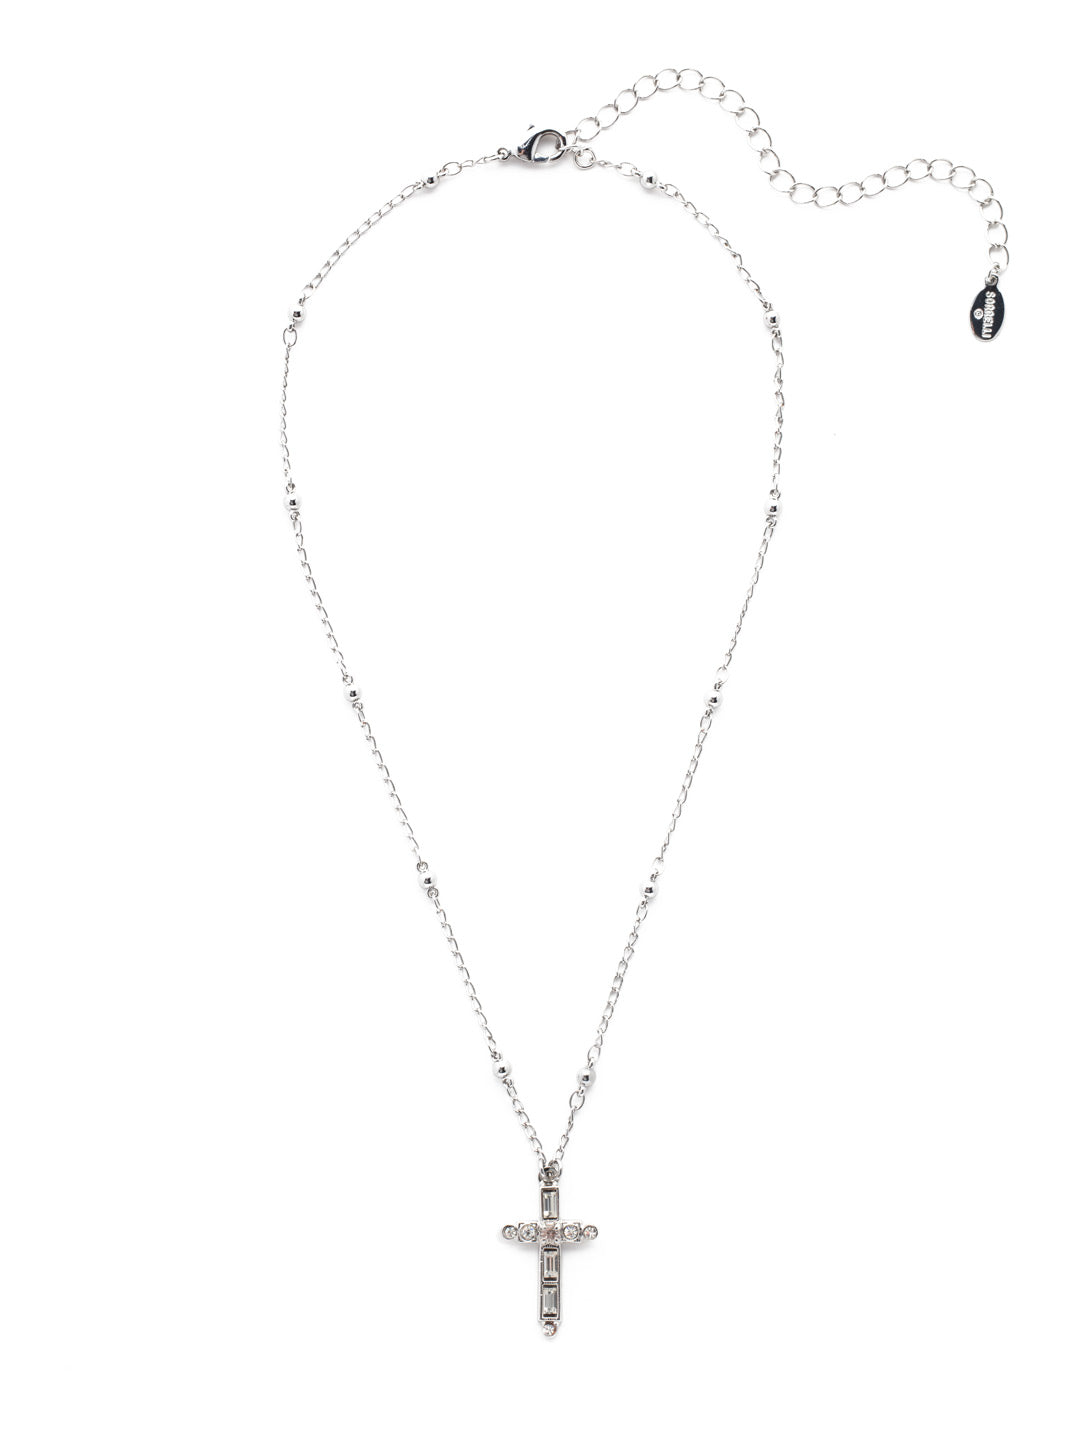 Millicent Cross Pendant Necklace - NEX5PDCRY - The Millicent Cross Pendant Necklace elevates a classic cross pendant with crystals and a studded adjustable chain. From Sorrelli's Crystal collection in our Palladium finish.